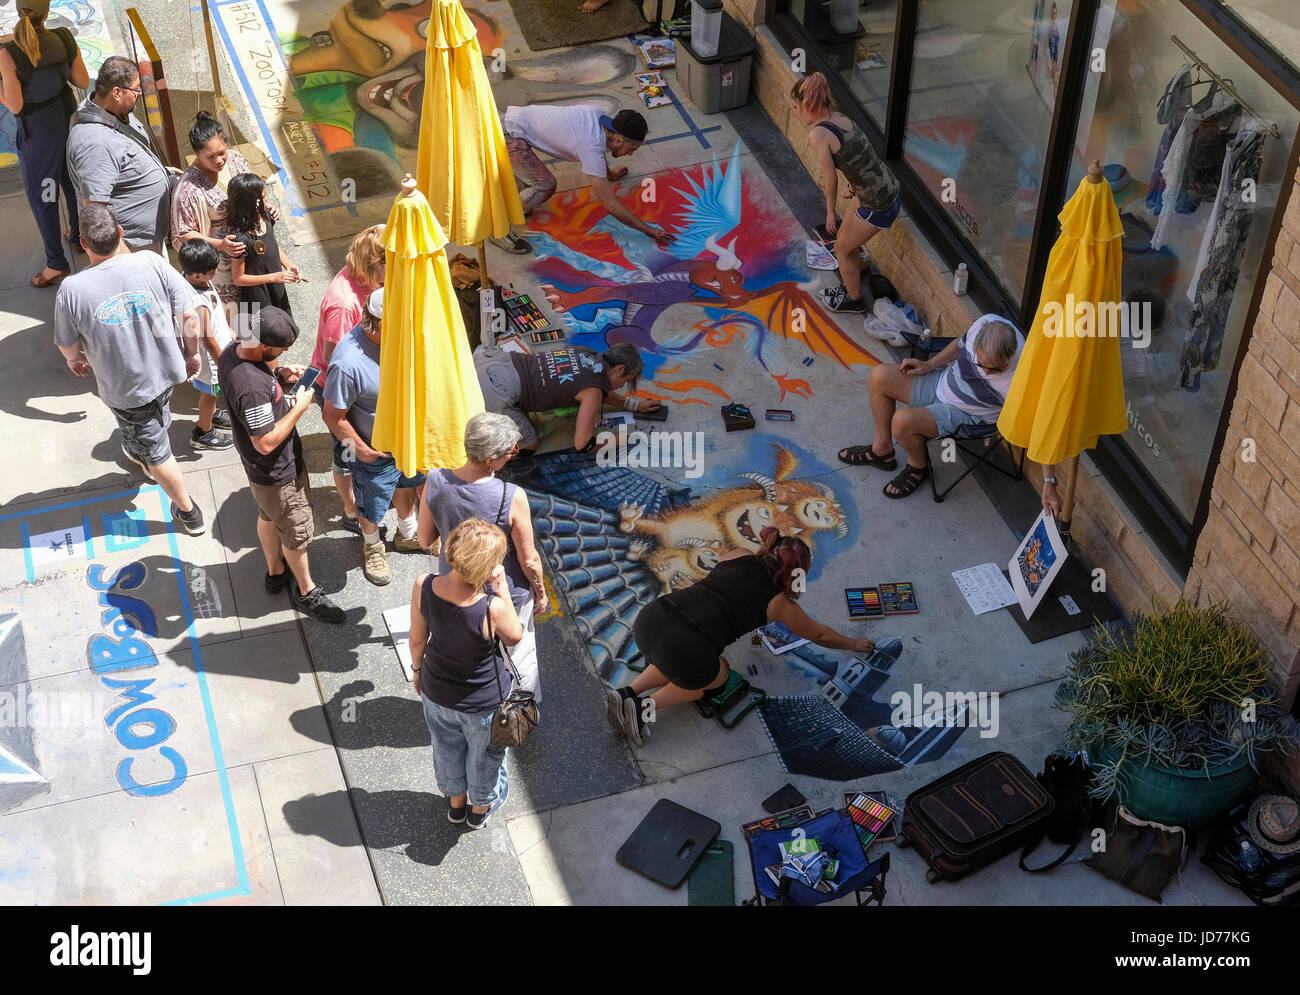 Los Angeles, USA. 18th June, 2017. Artists work on their pieces during the 25th annual Pasadena Chalk Festival in Los Angeles, the United States, June 18, 2017. Hundreds artists used more than 25,000 sticks of pastel chalk to create life-size murals on the city pavement. Credit: Zhao Hanrong/Xinhua/Alamy Live News Stock Photo